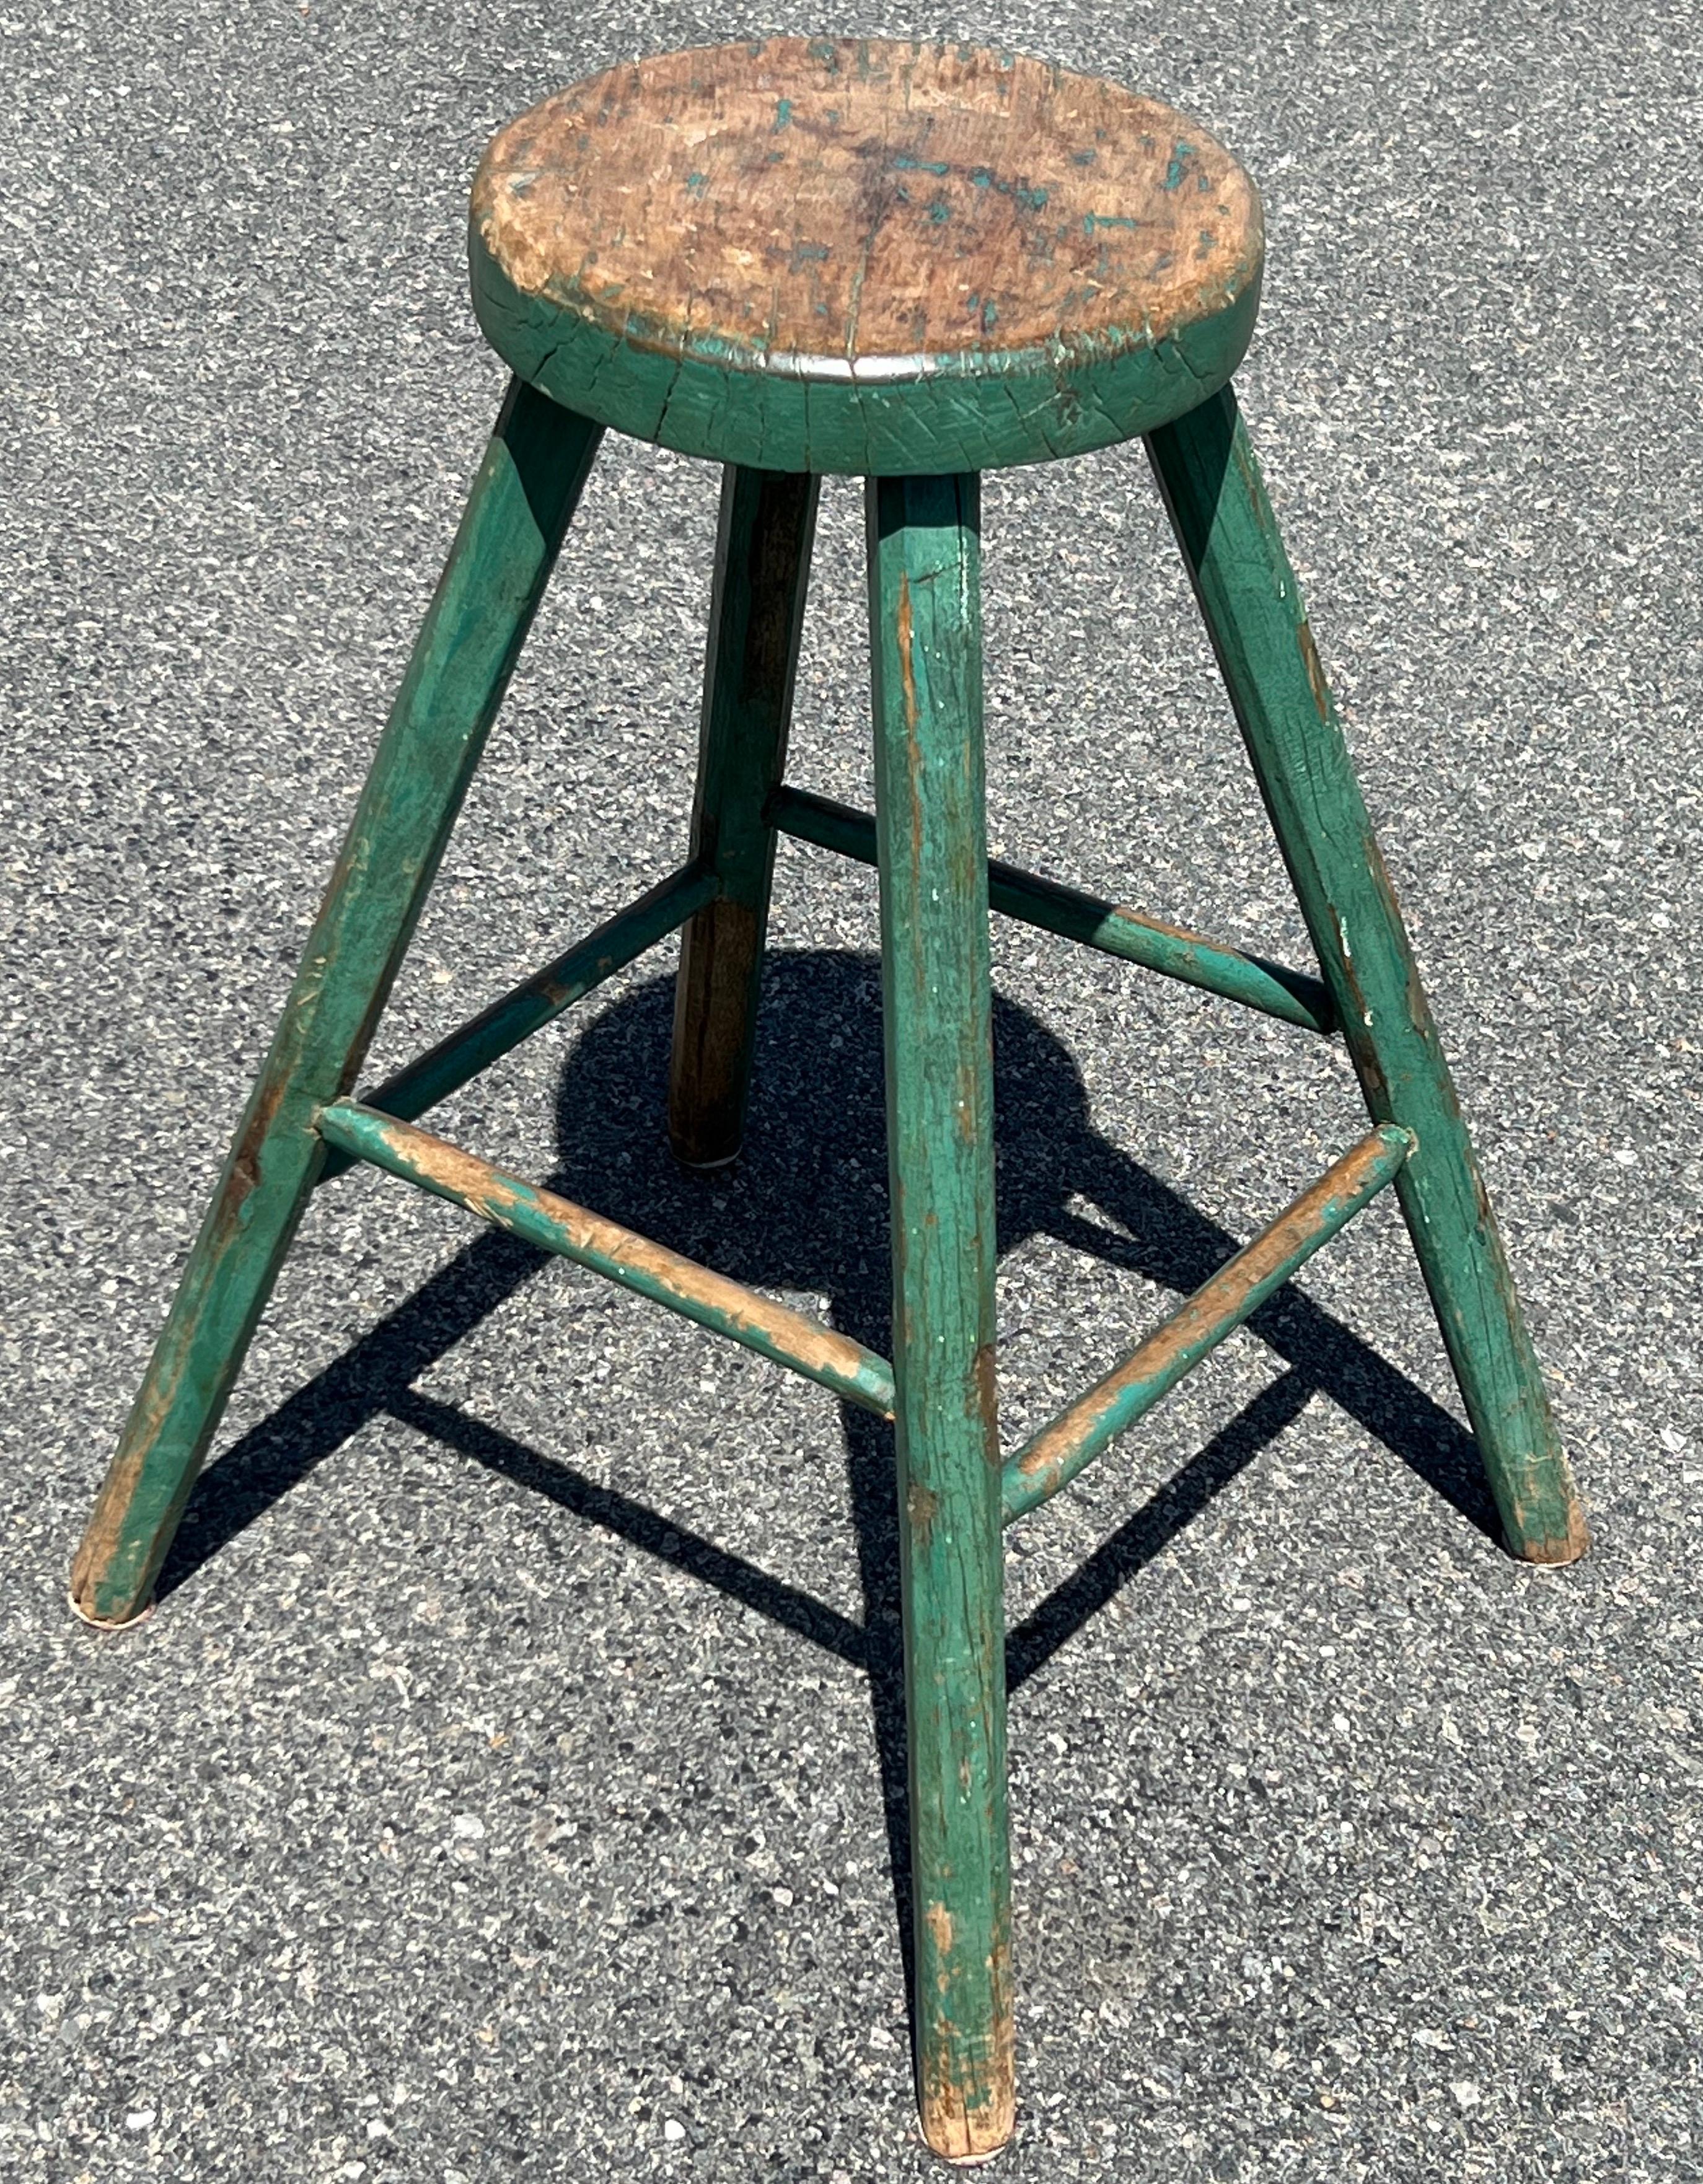 19th Century Green Painted Stool with Splayed Legs In Good Condition For Sale In Nantucket, MA